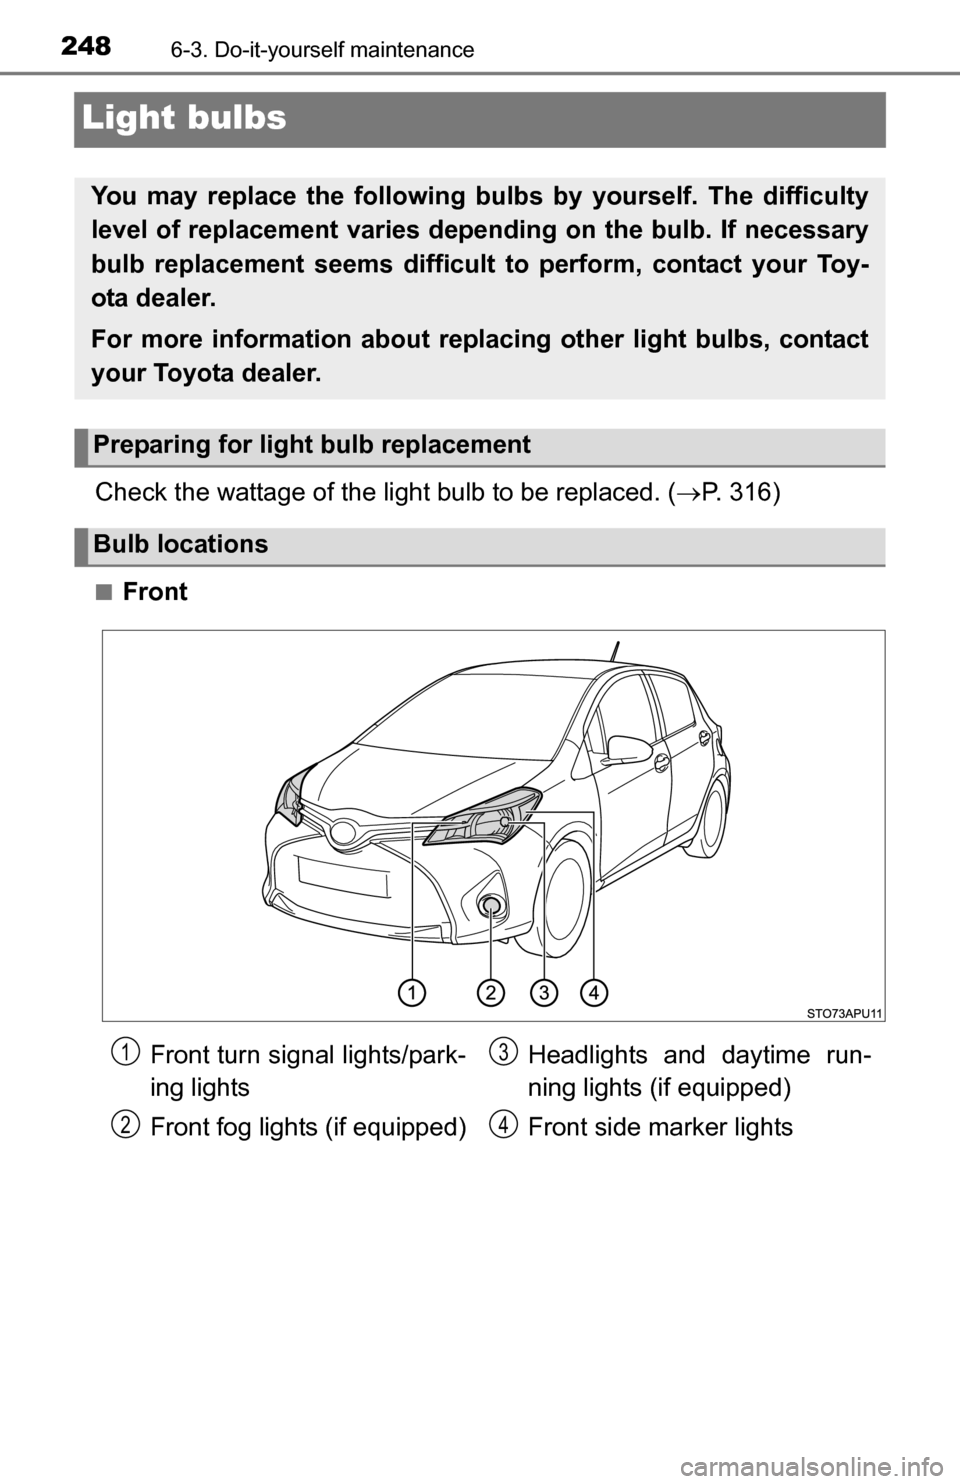 TOYOTA YARIS 2016 3.G Owners Manual 2486-3. Do-it-yourself maintenance
Light bulbs
Check the wattage of the light bulb to be replaced. (P. 316)
■Front
You may replace the following bulbs  by yourself. The difficulty
level of replac